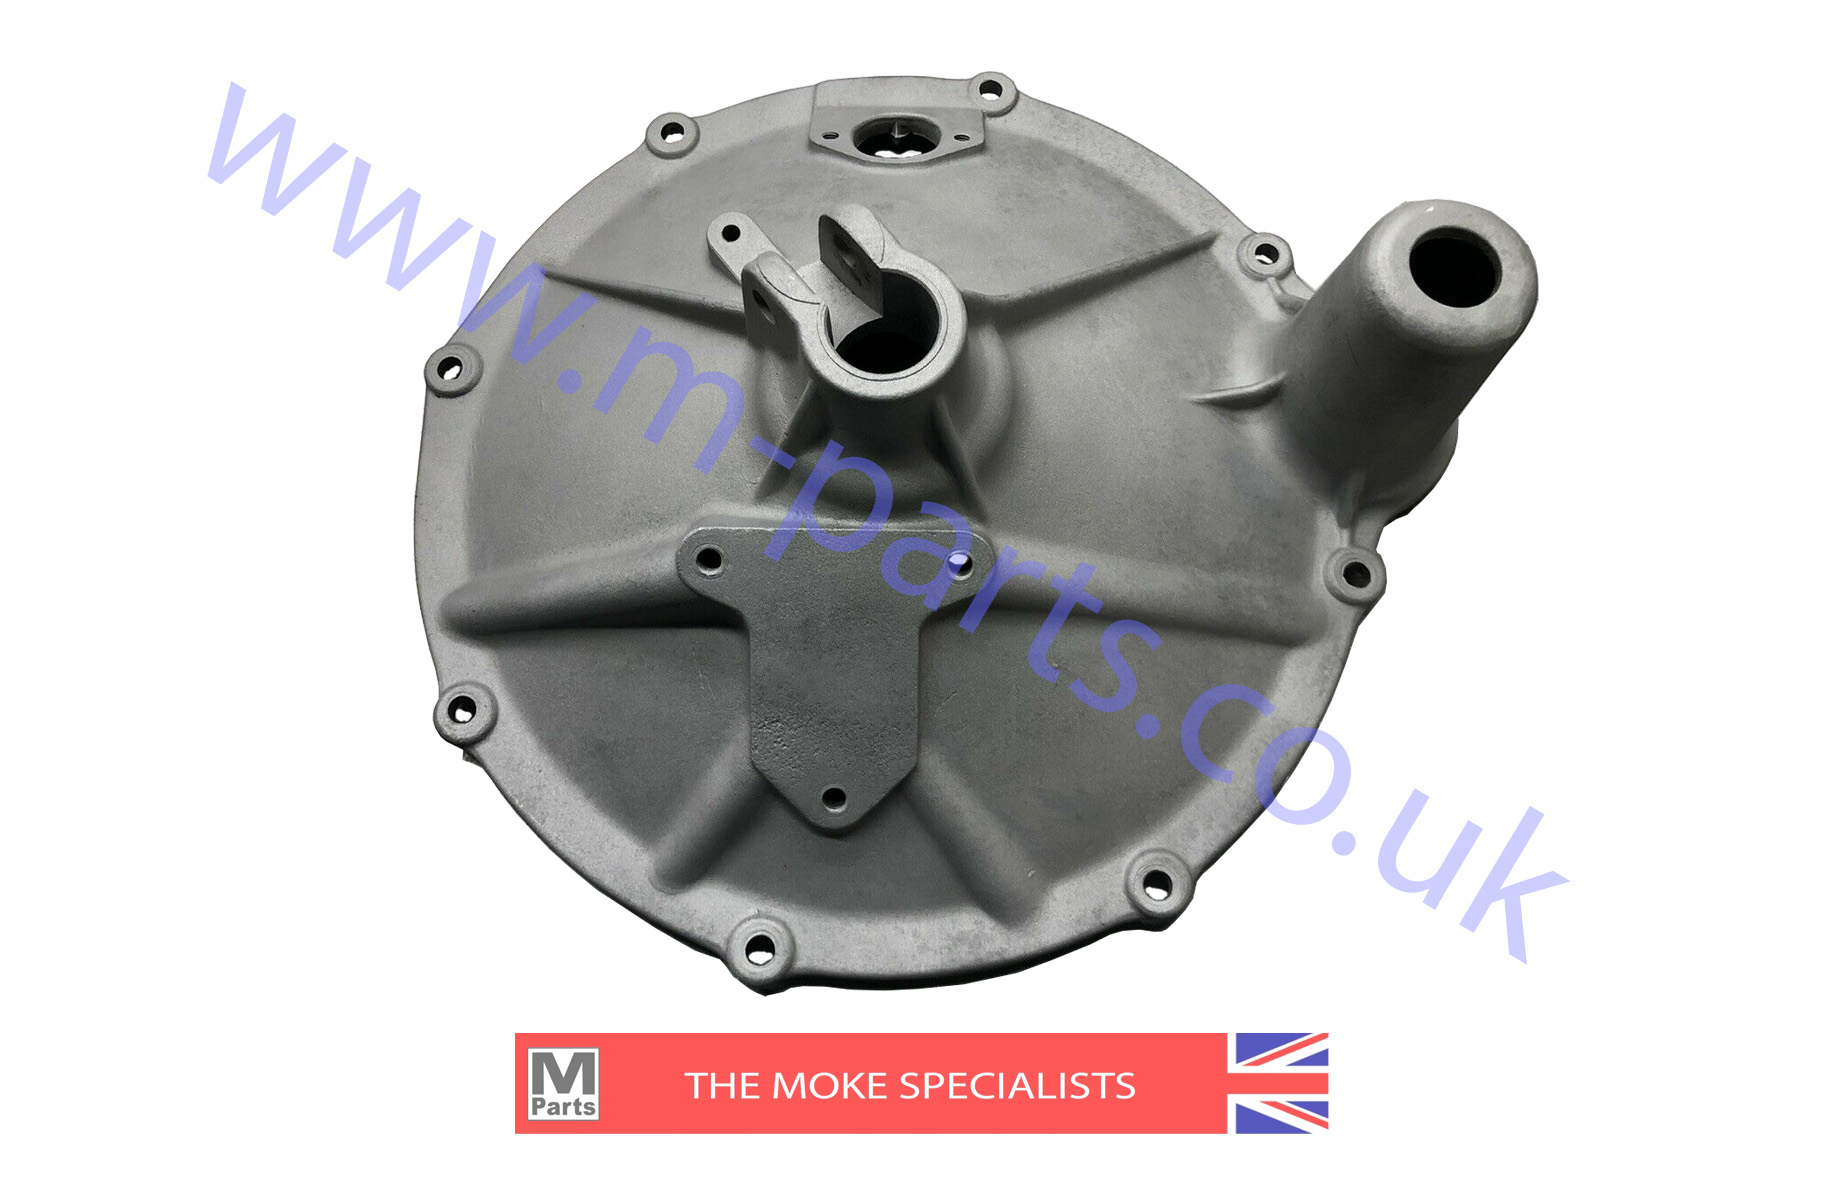 17. Flywheel and clutch cover